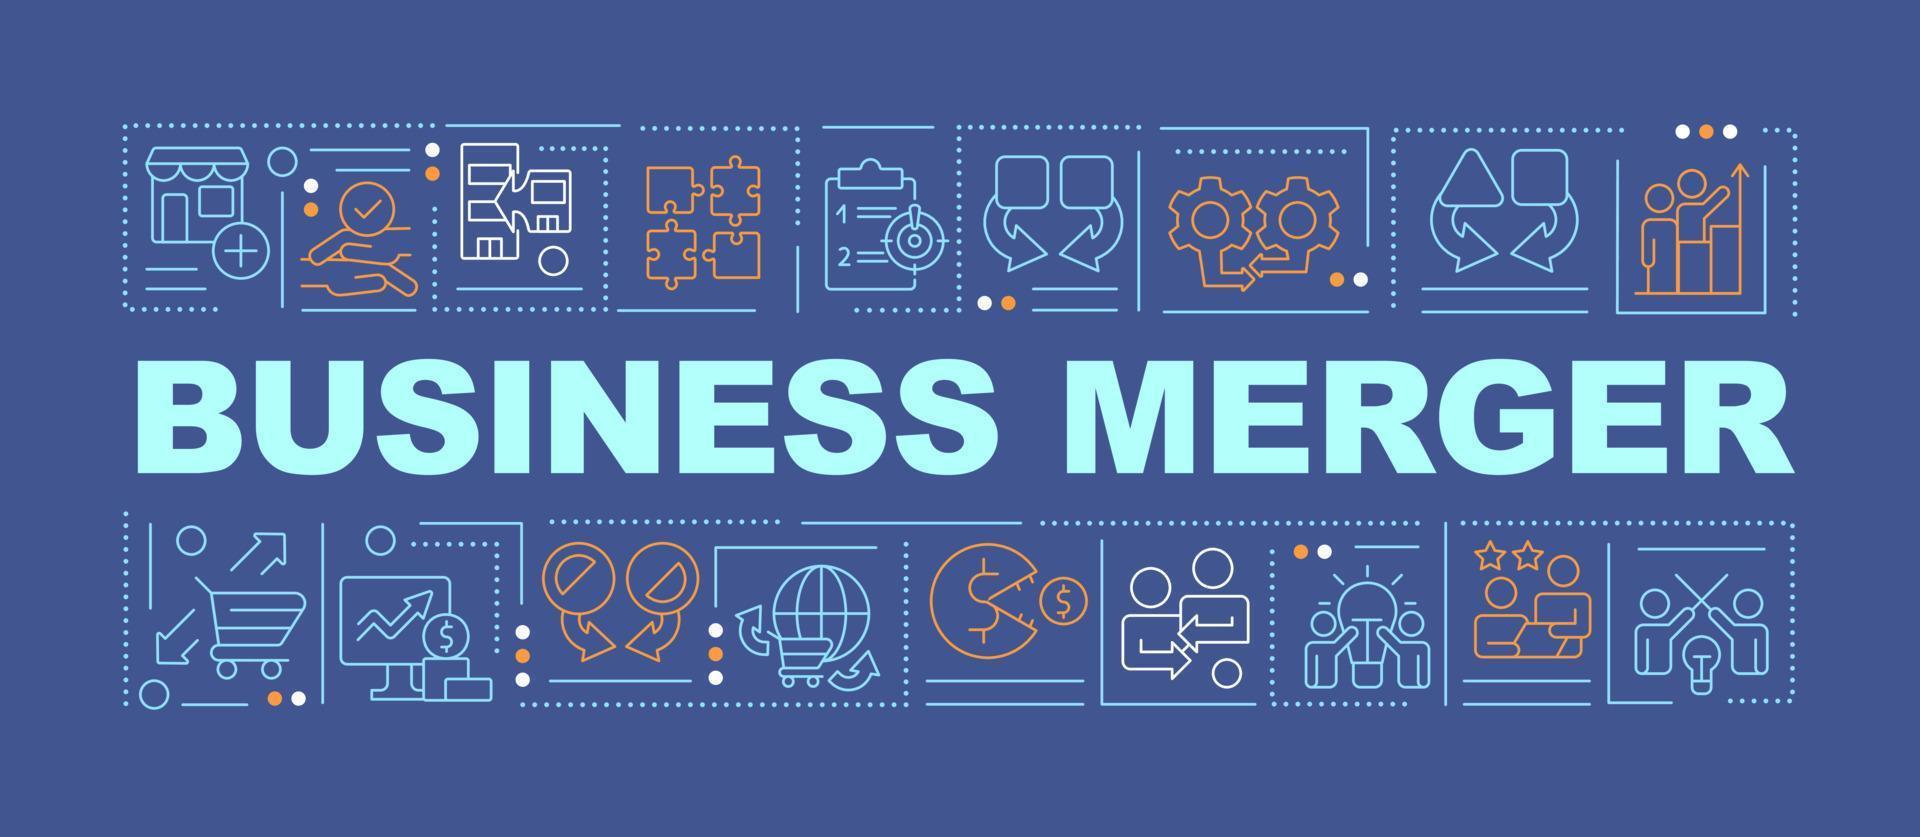 Business merger word concepts dark blue banner. Companies fusion. Infographics with editable icons on color background. Isolated typography. Vector illustration with text